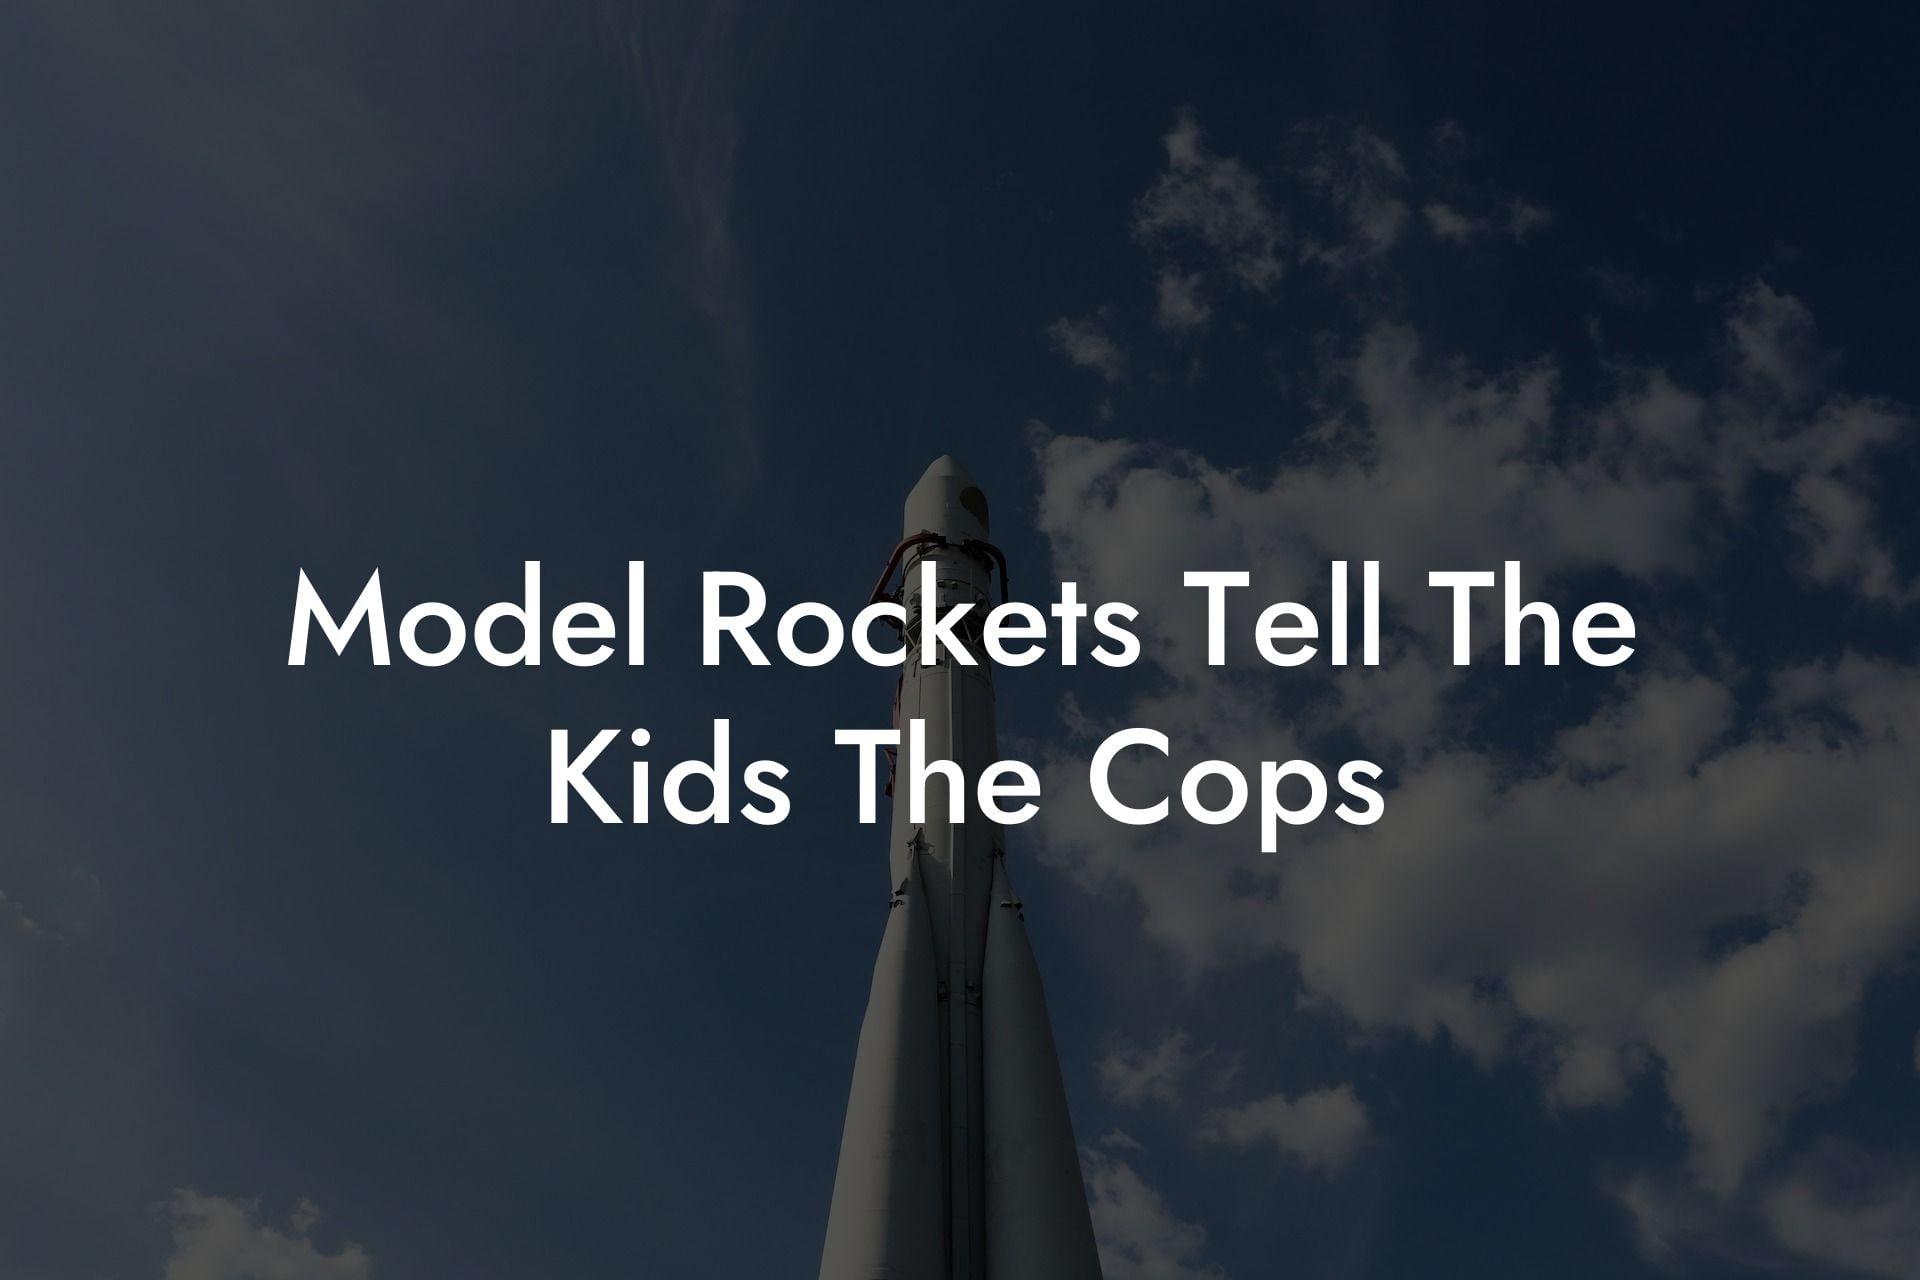 Model Rockets Tell The Kids The Cops